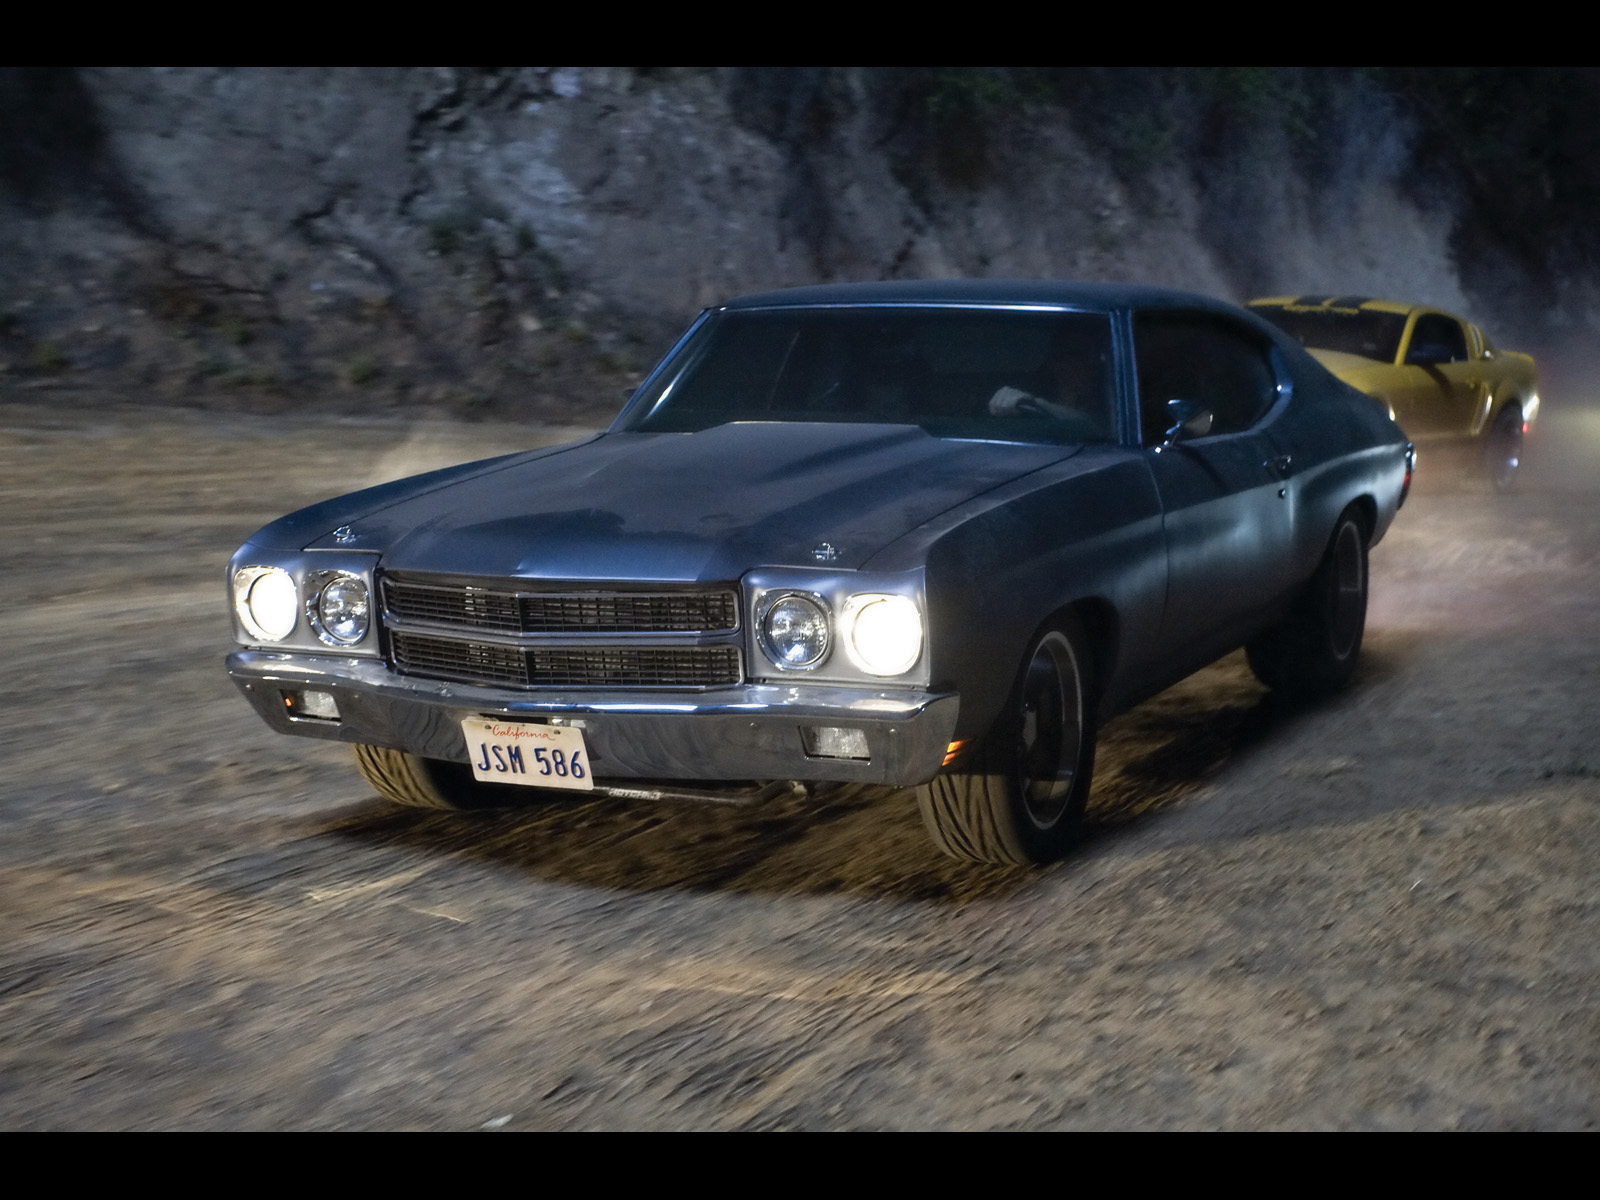 Fast Furious Movie Cars Chevelle Wallpaper